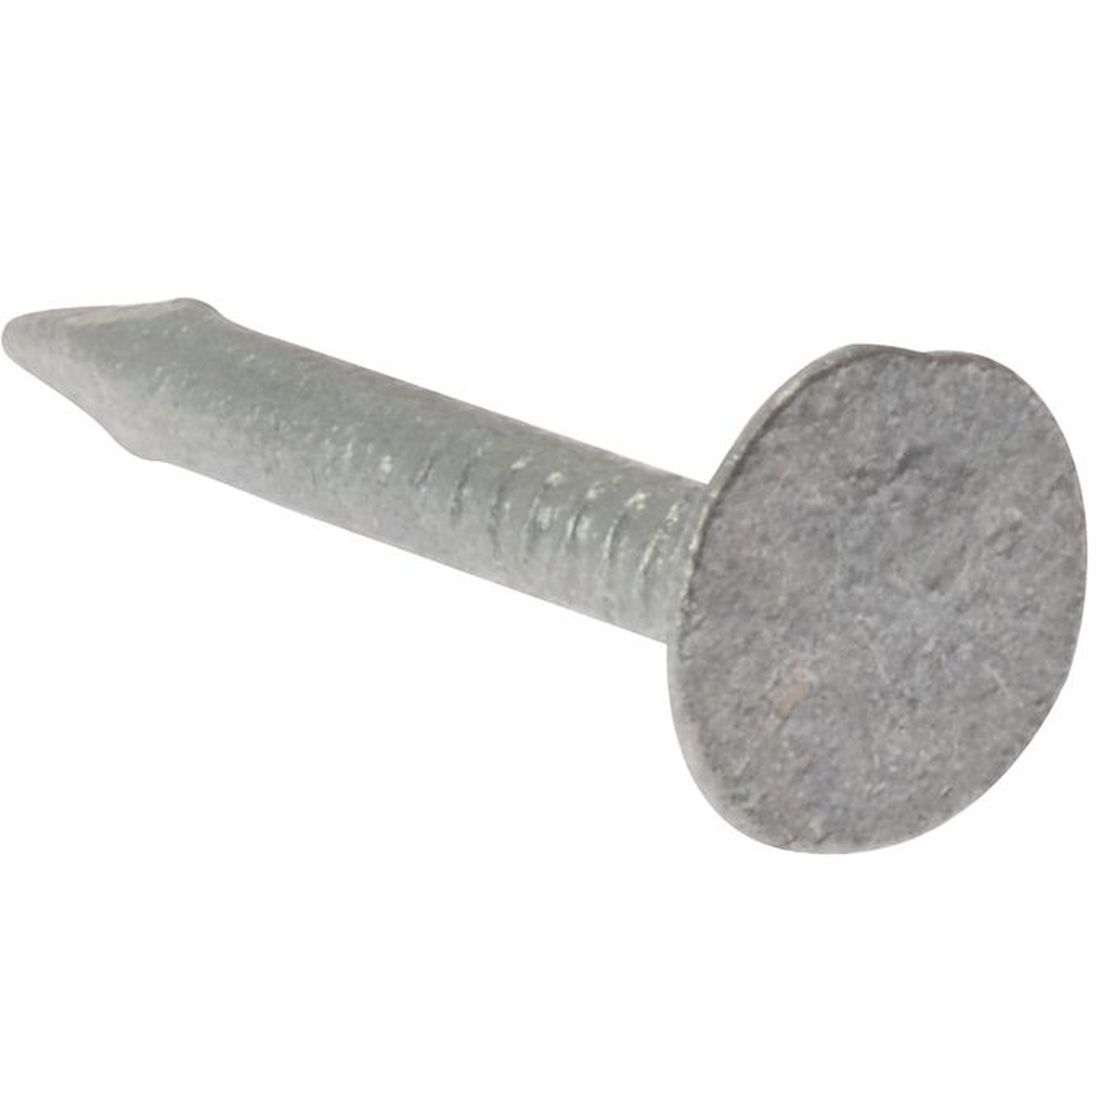 ForgeFix Clout Nail Extra Large Head Galvanised 25mm (500g Bag)                          